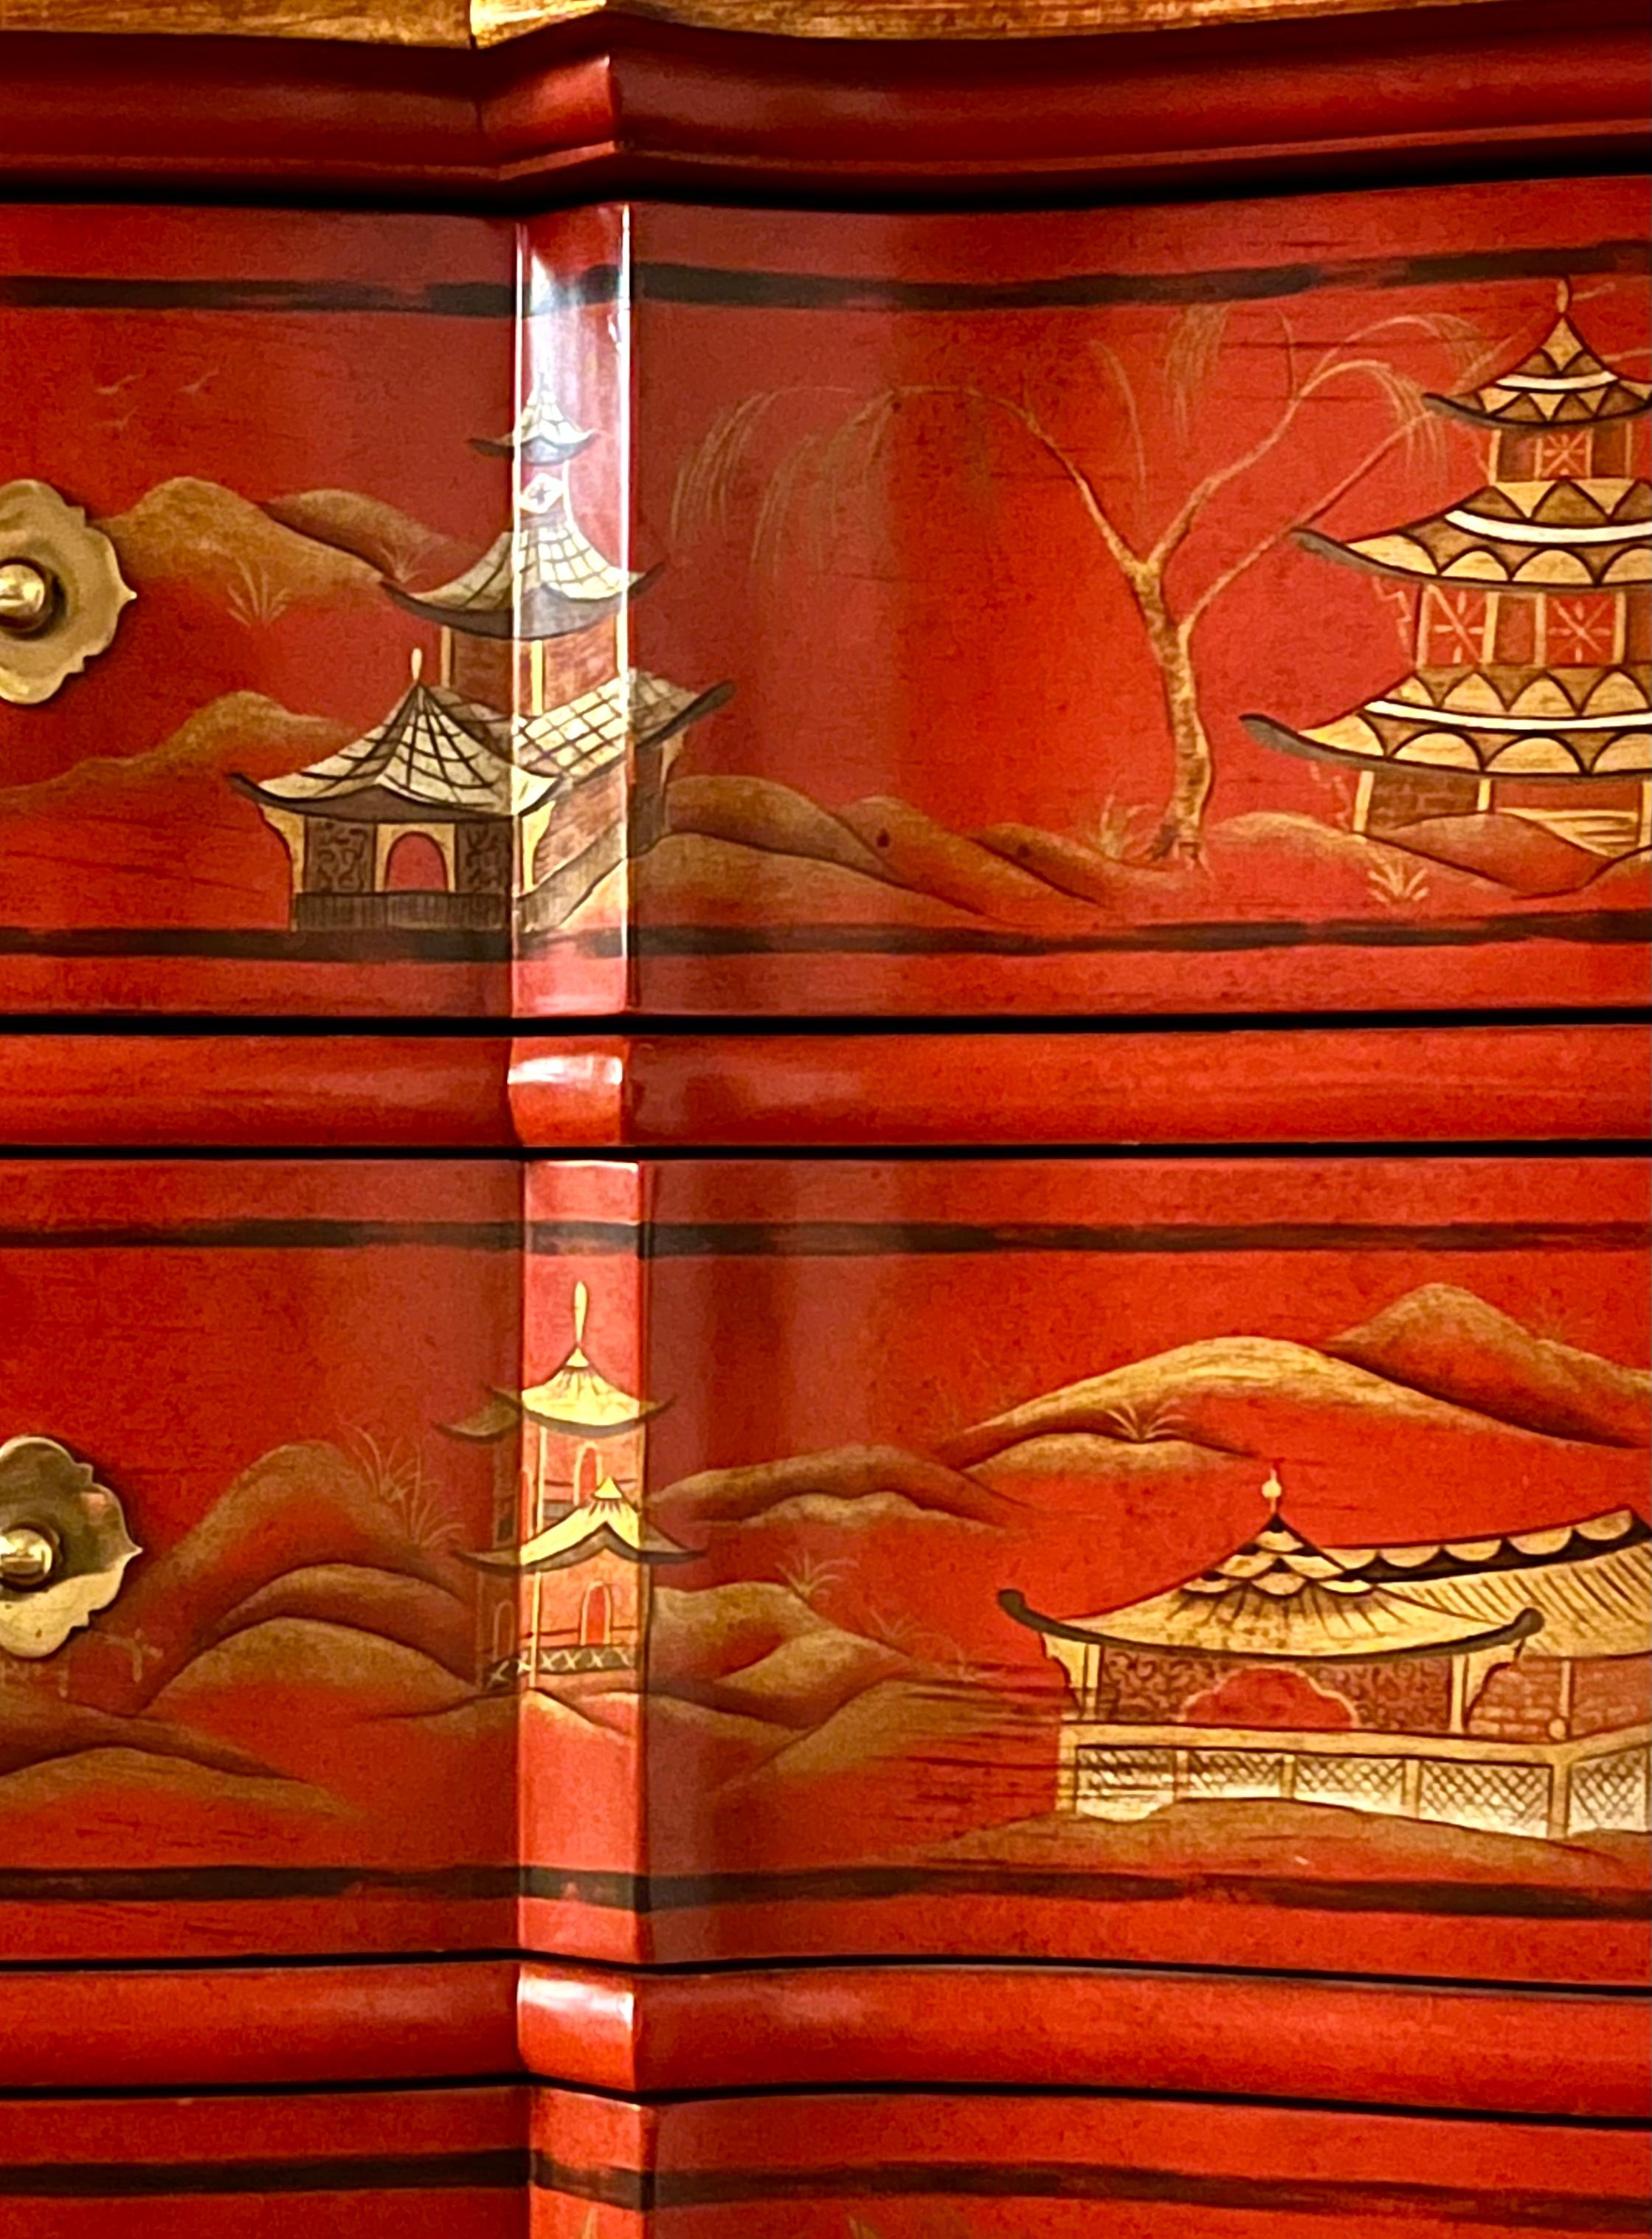 red lacquer dresser